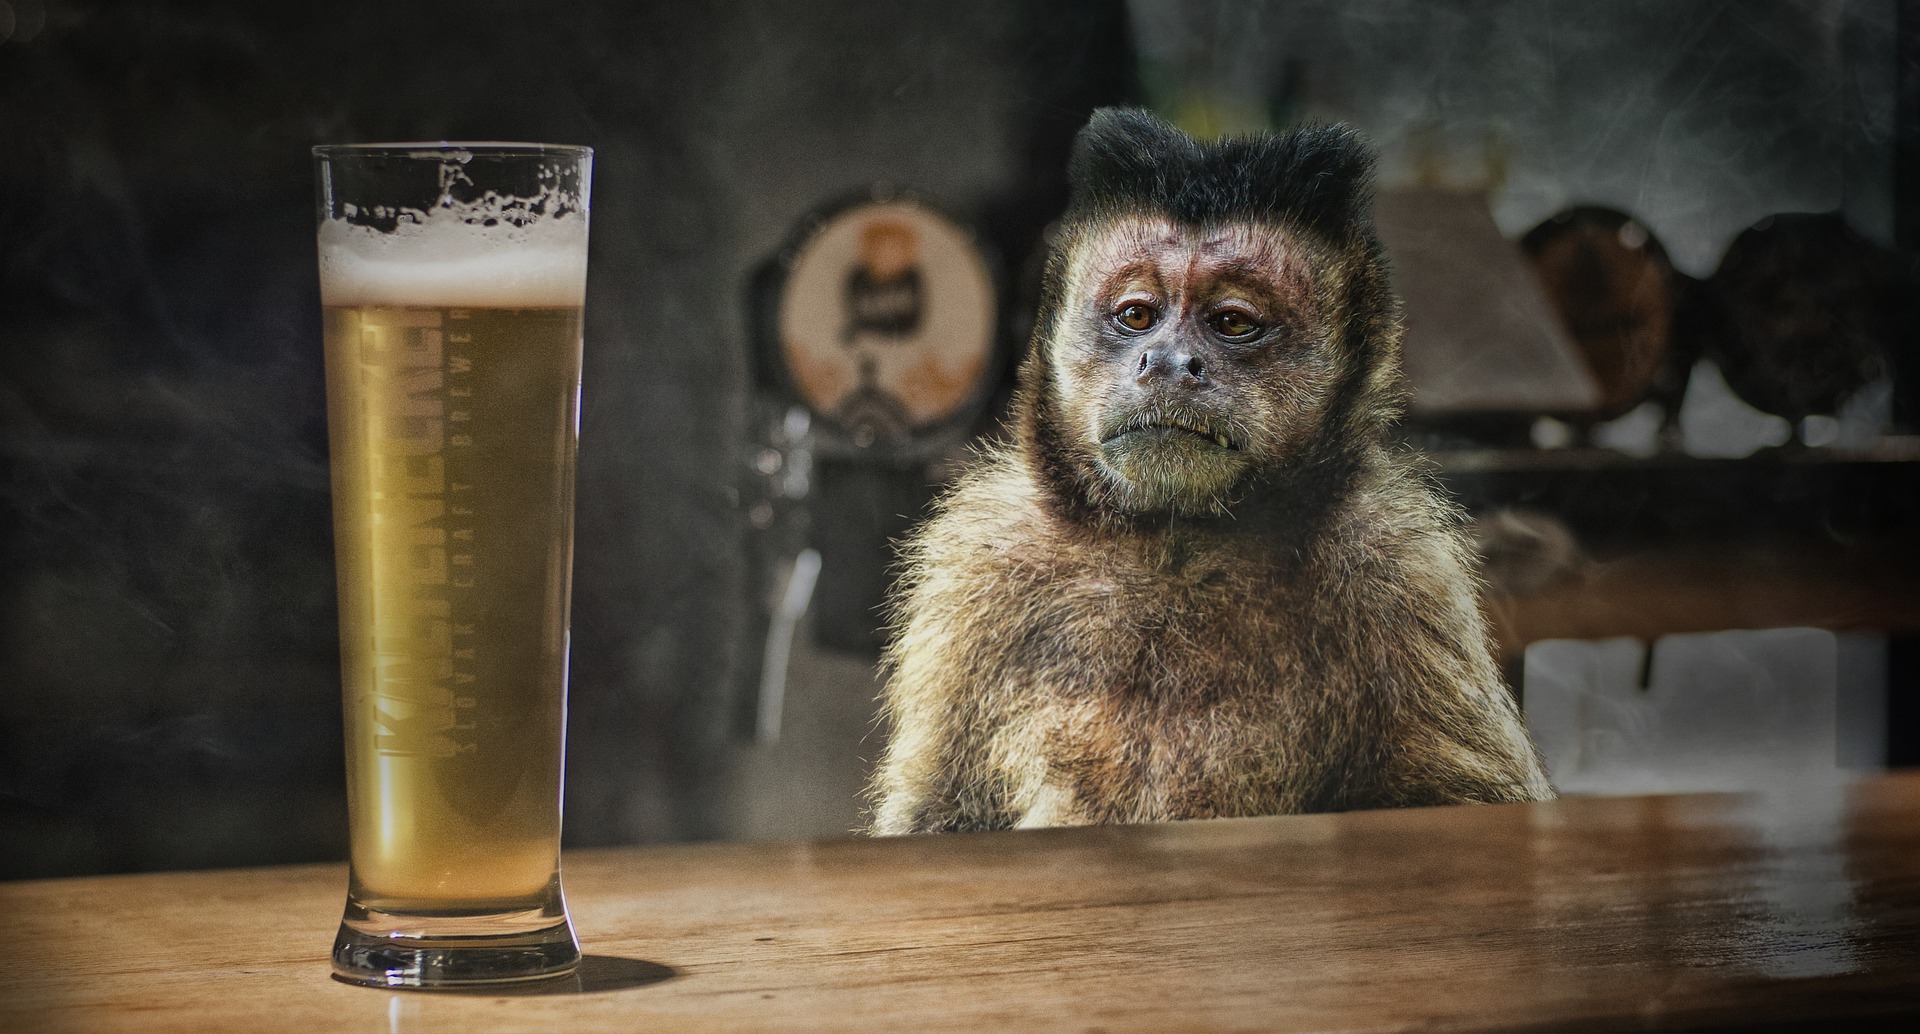 Monkey and Beer